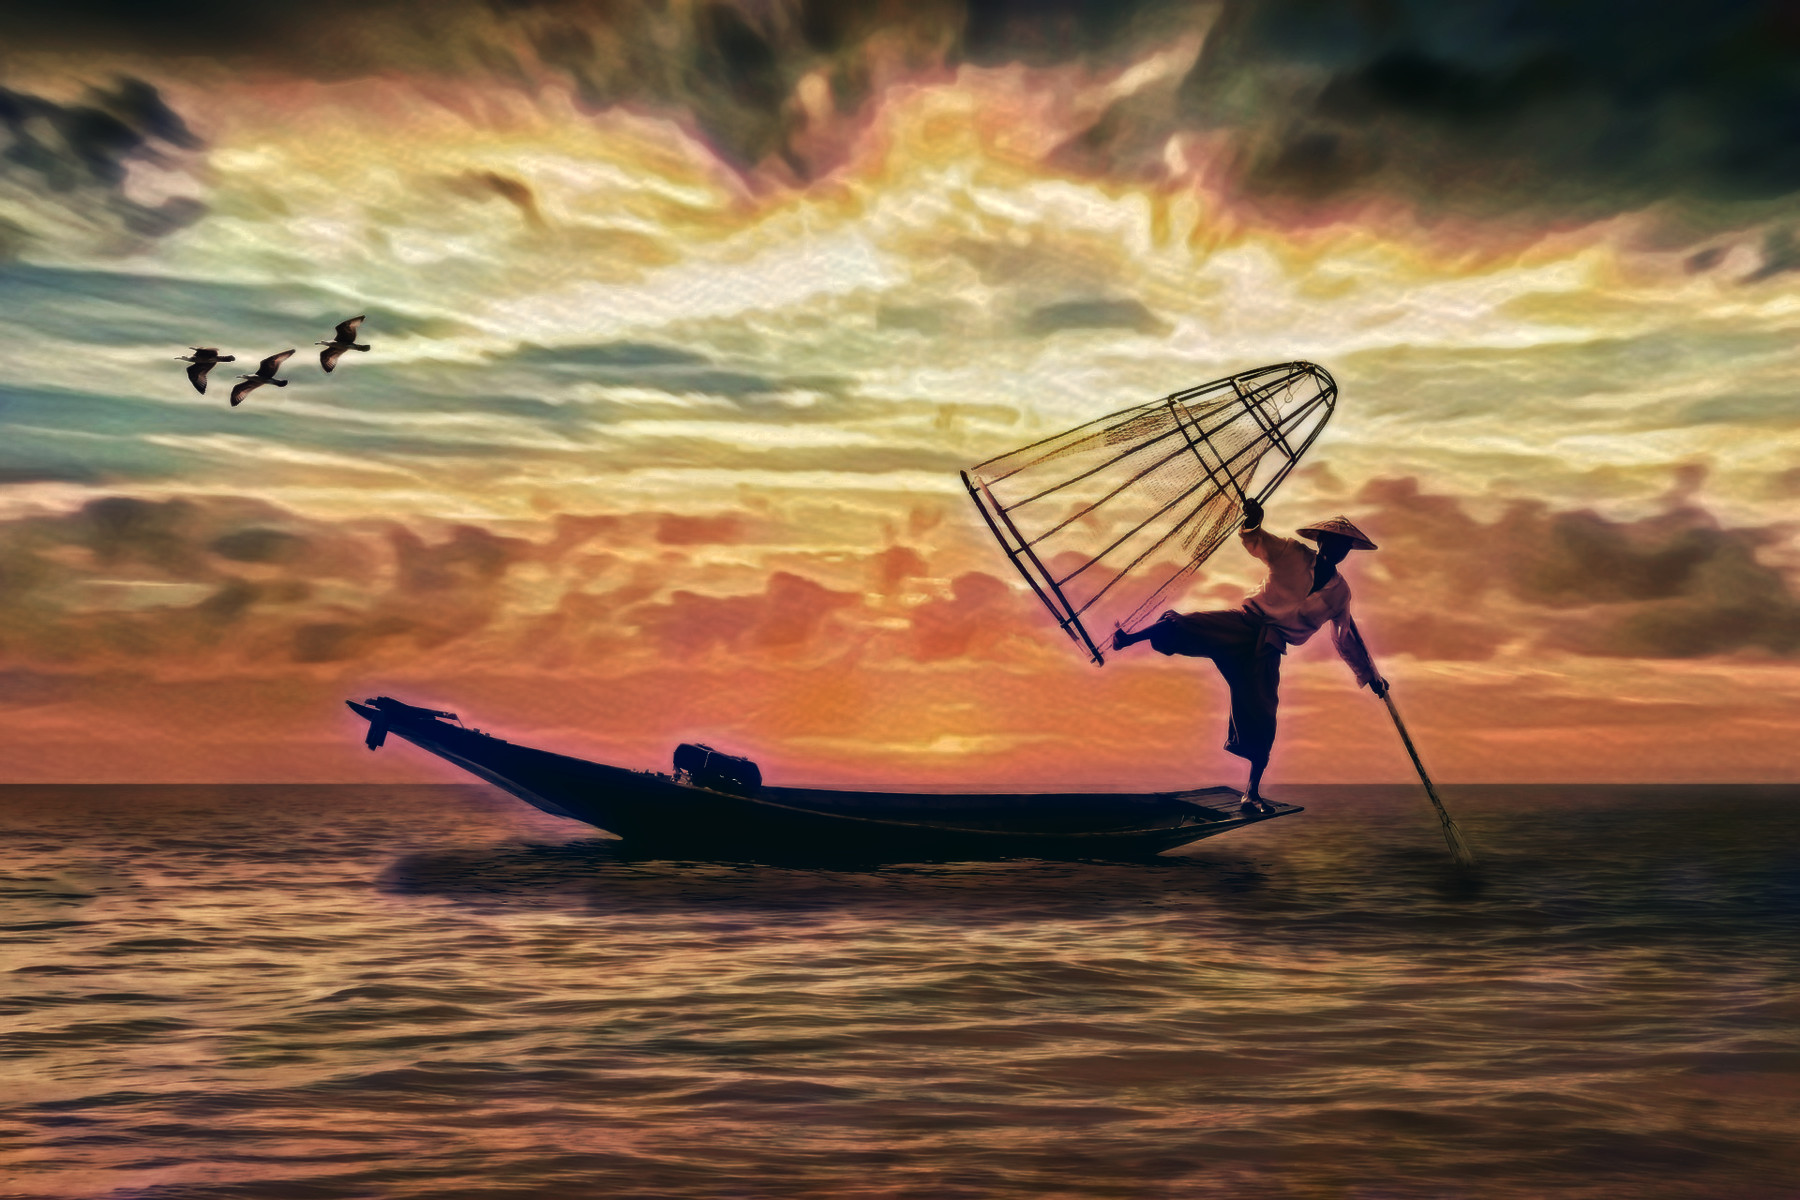 2023-11-15 16-21-21 fisherman-2739115_1920 with a Free Paint Effect, paint DreamyAbstr, strokes TextureC, contour CPencil, poster GmPoster, toppat DetailMap, postpro Retinex.jpg